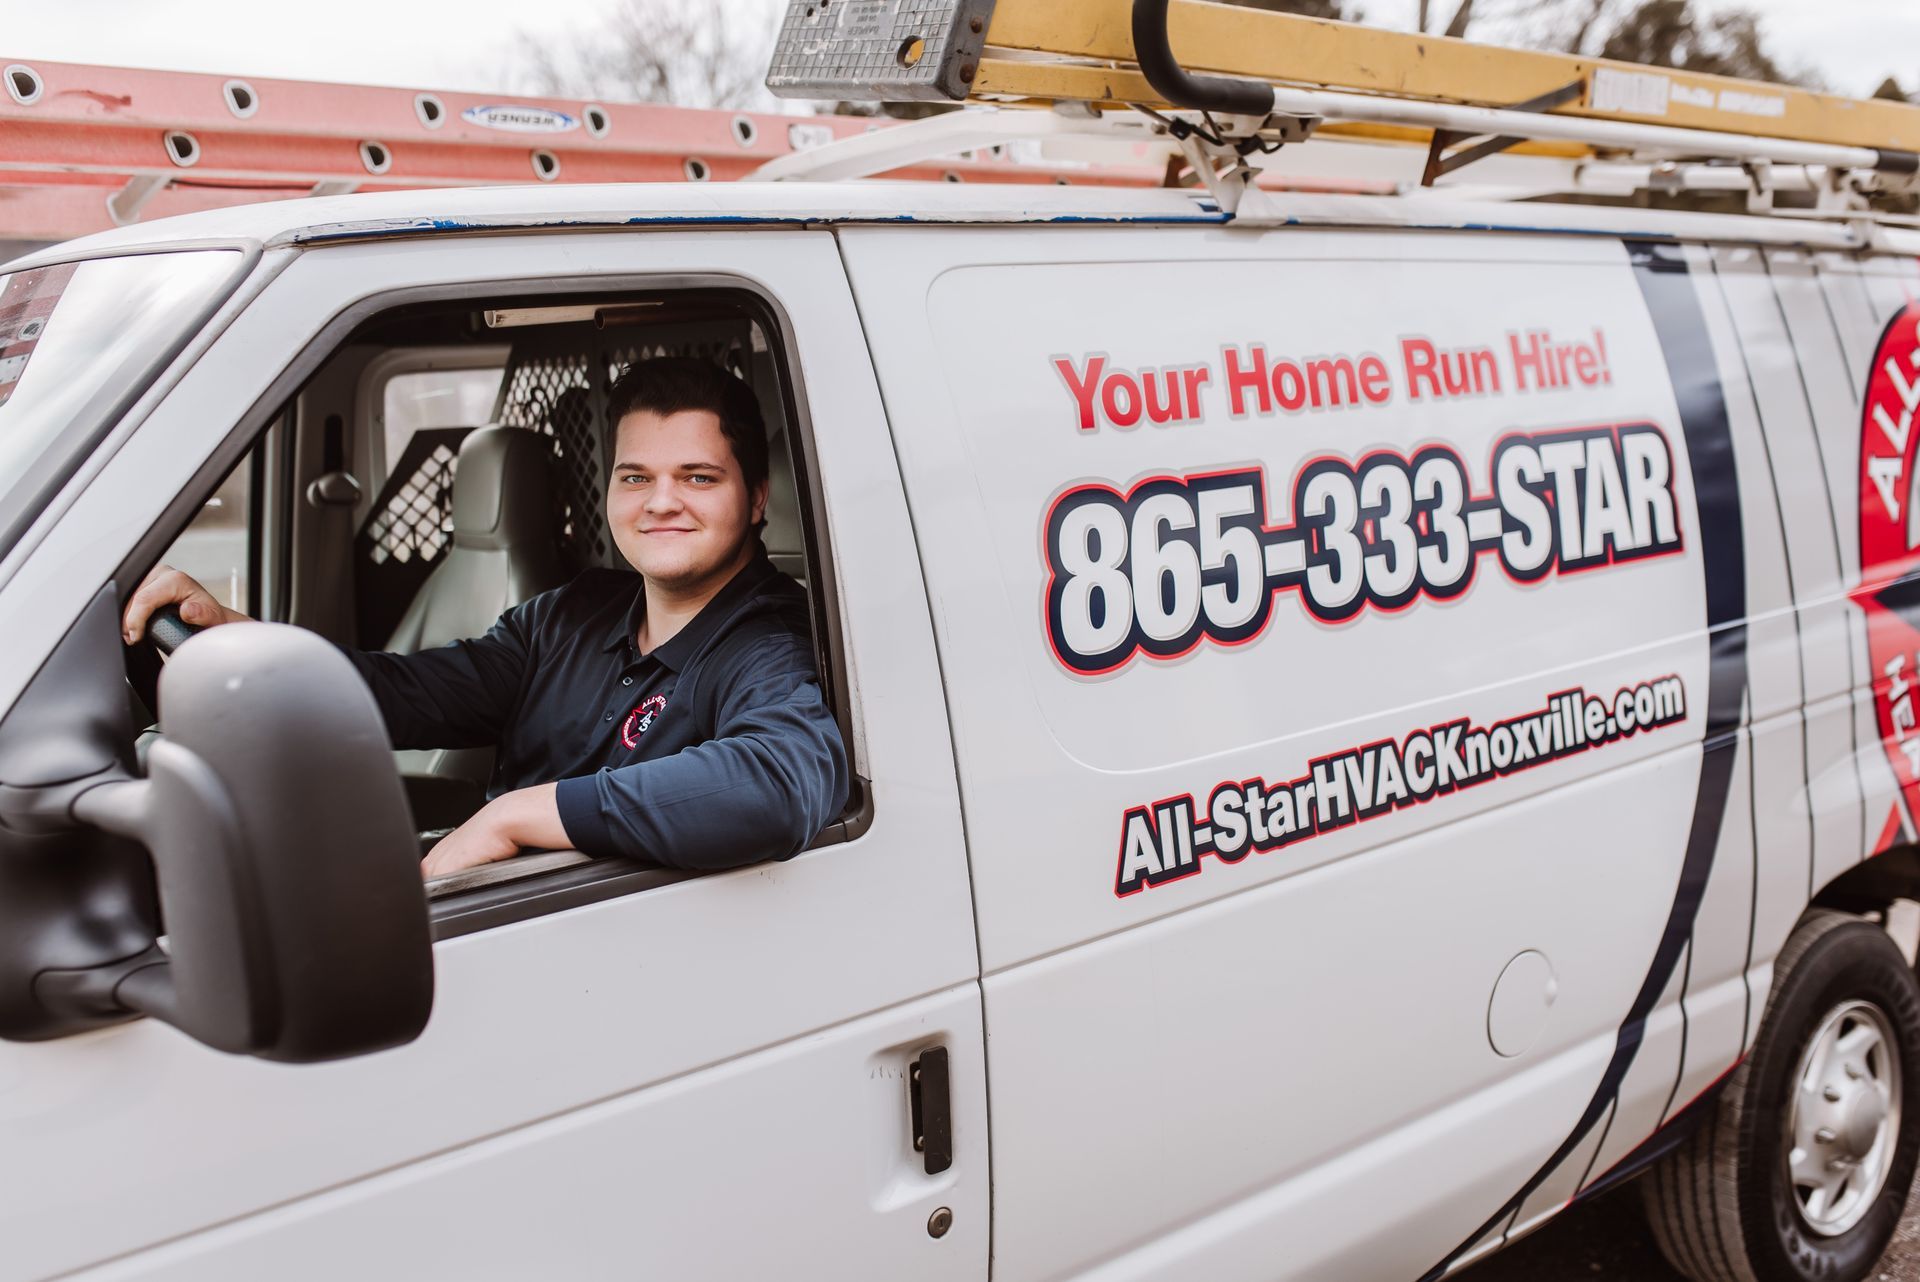 All Star Heating and Air Conditioning technician